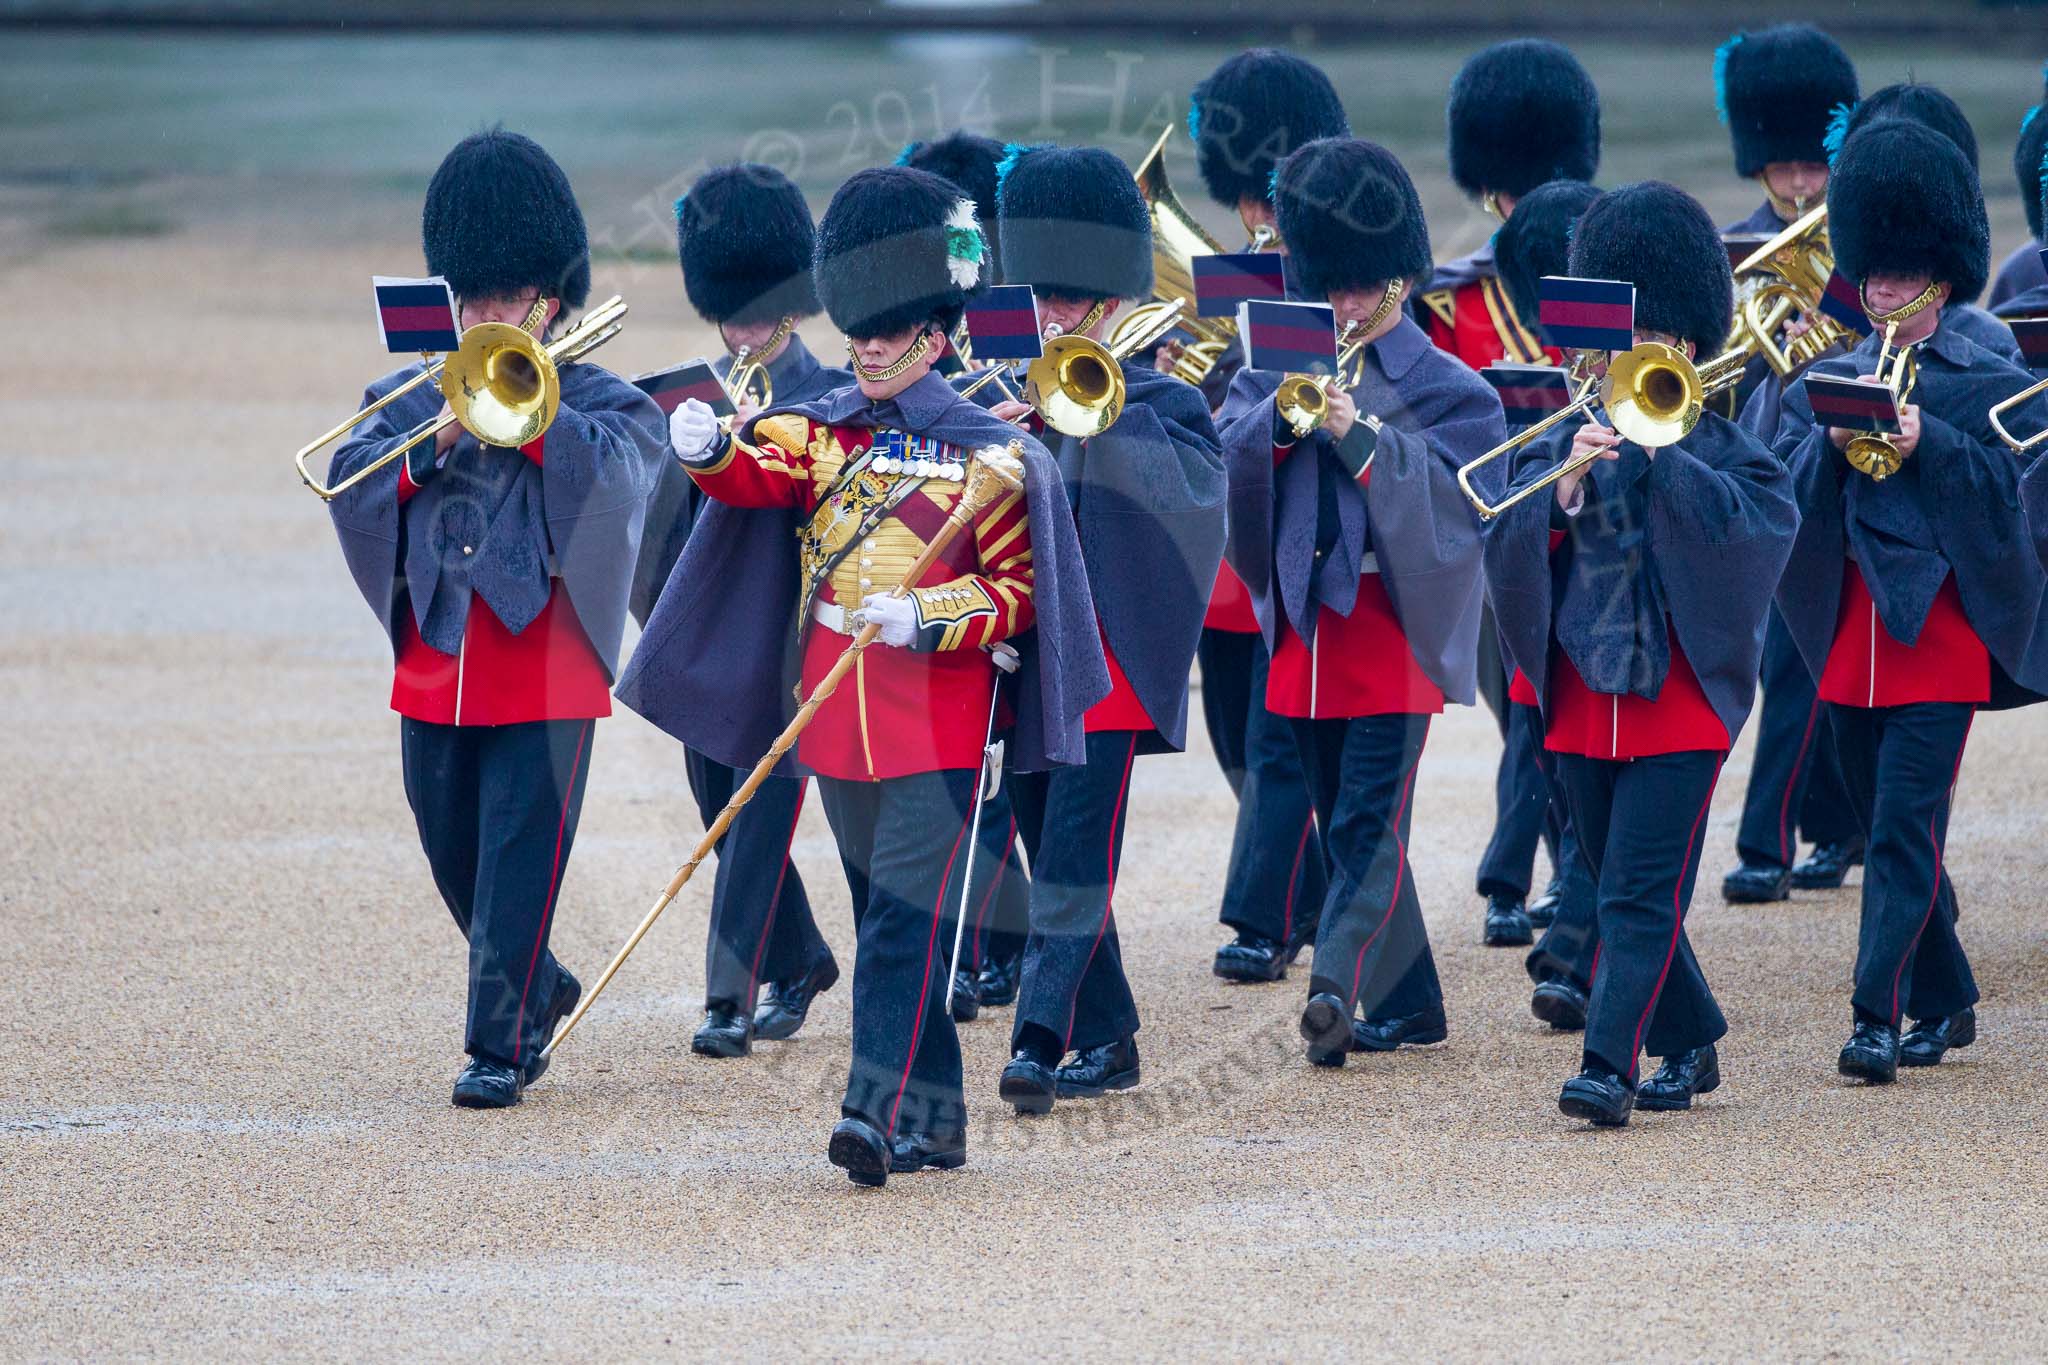 The Colonel's Review 2014.
Horse Guards Parade, Westminster,
London,

United Kingdom,
on 07 June 2014 at 10:06, image #57